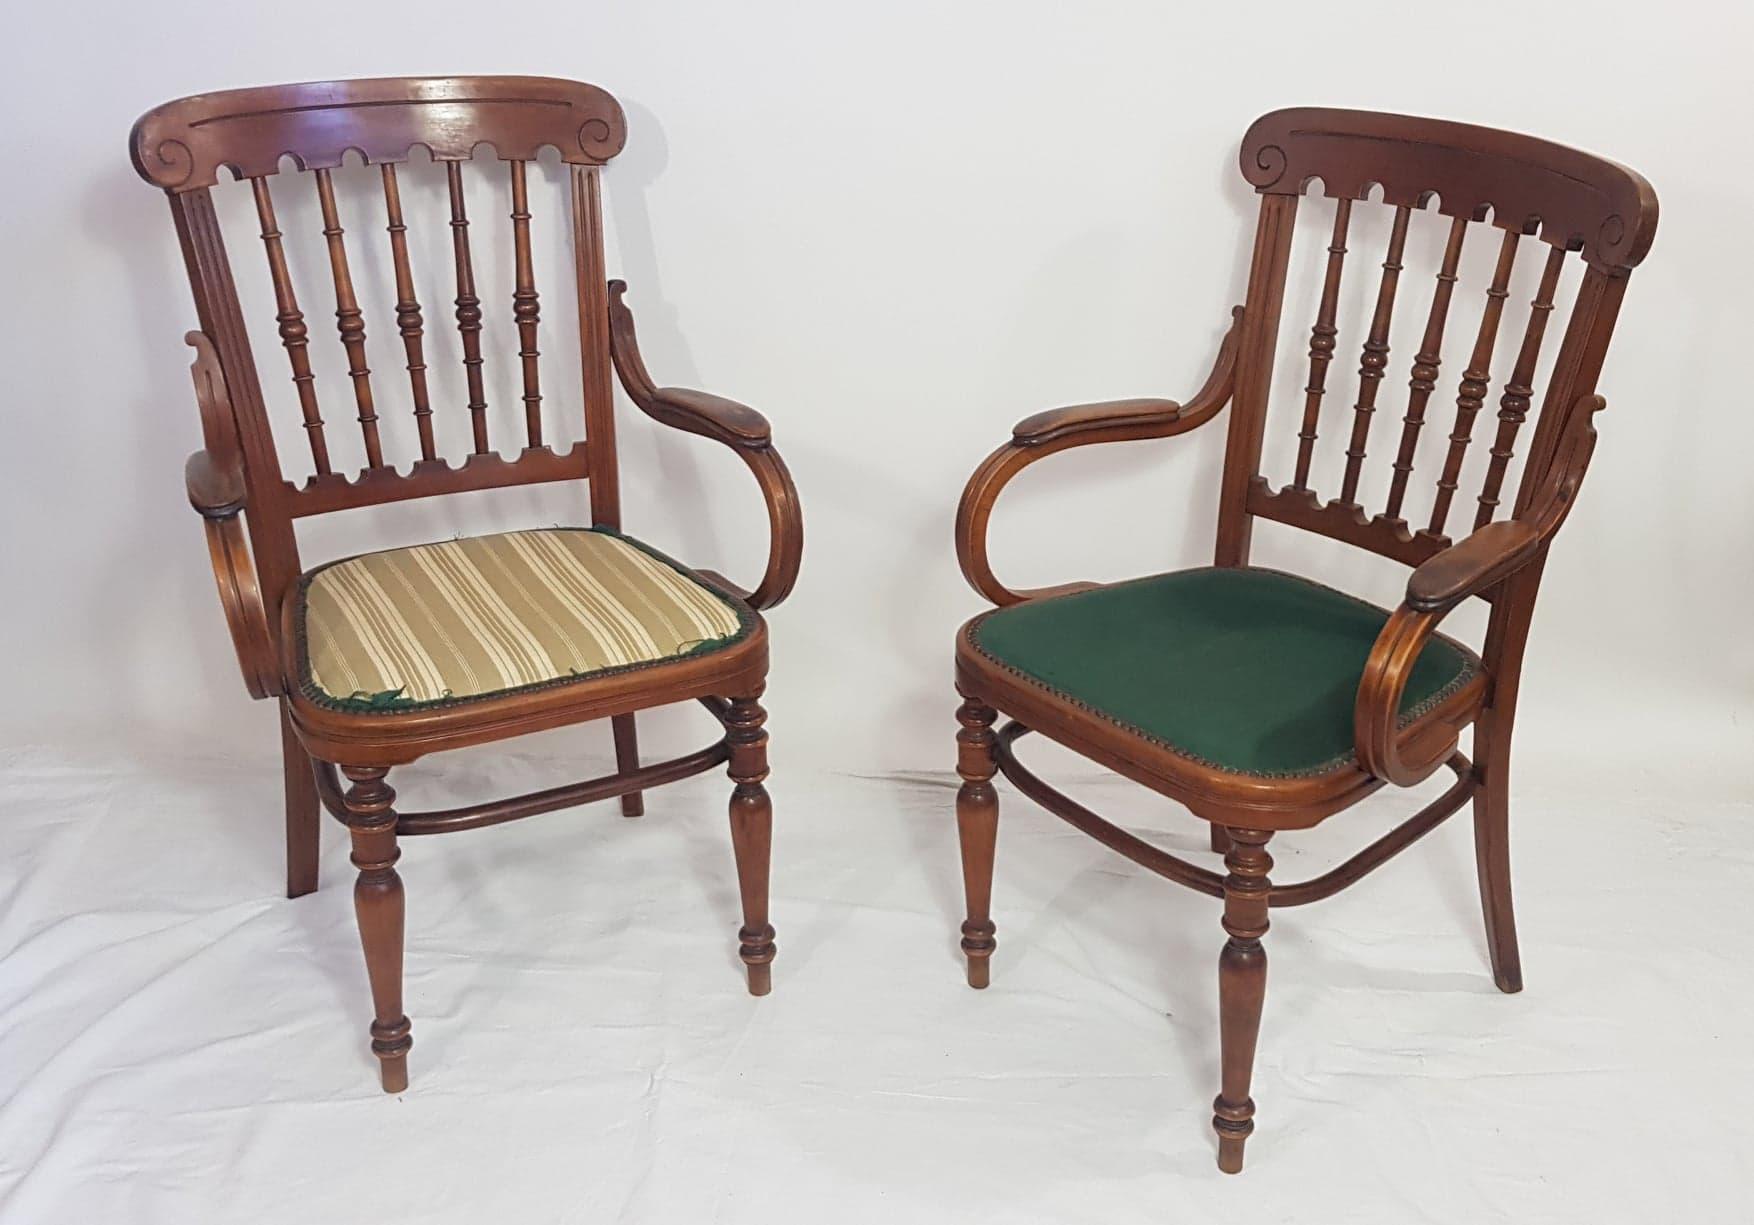 A set of two chairs, two armchairs and a bench in curve wood. From the early 20th.
They are in a very good condition.
